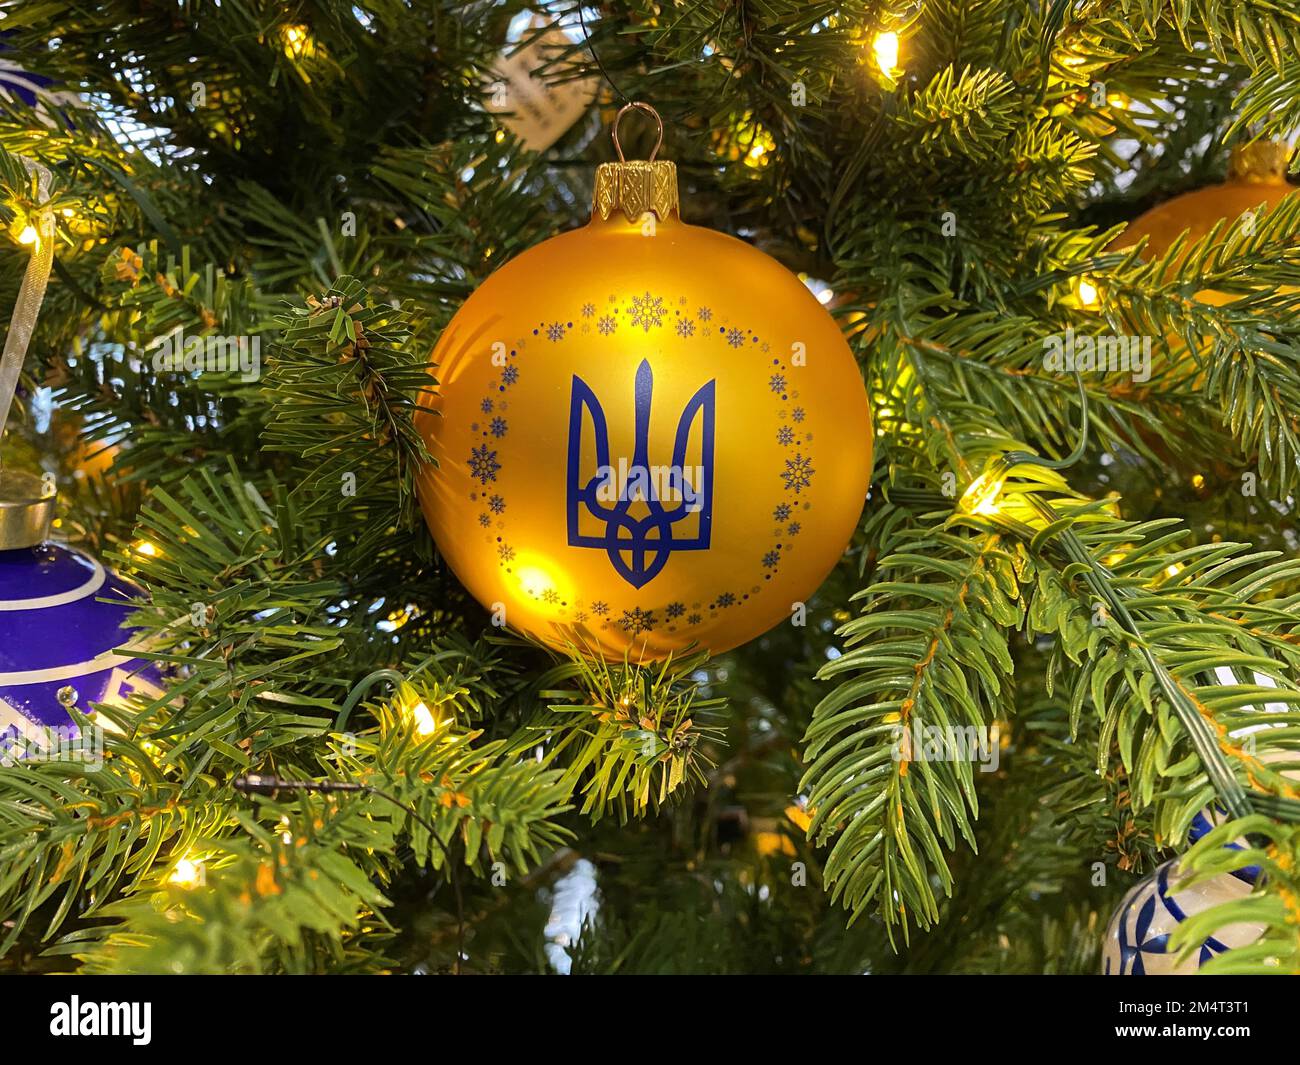 Kiew, Ukraine. 20th Dec, 2022. On a decorated tree in a store hangs a ball in the Ukrainian national colors of blue and yellow with the trident as a coat of arms. (About the KORR report: 'Dark Christmas in Kiev - Putin's war also shifts traditions') Credit: Ulf Mauder/dpa/Alamy Live News Stock Photo